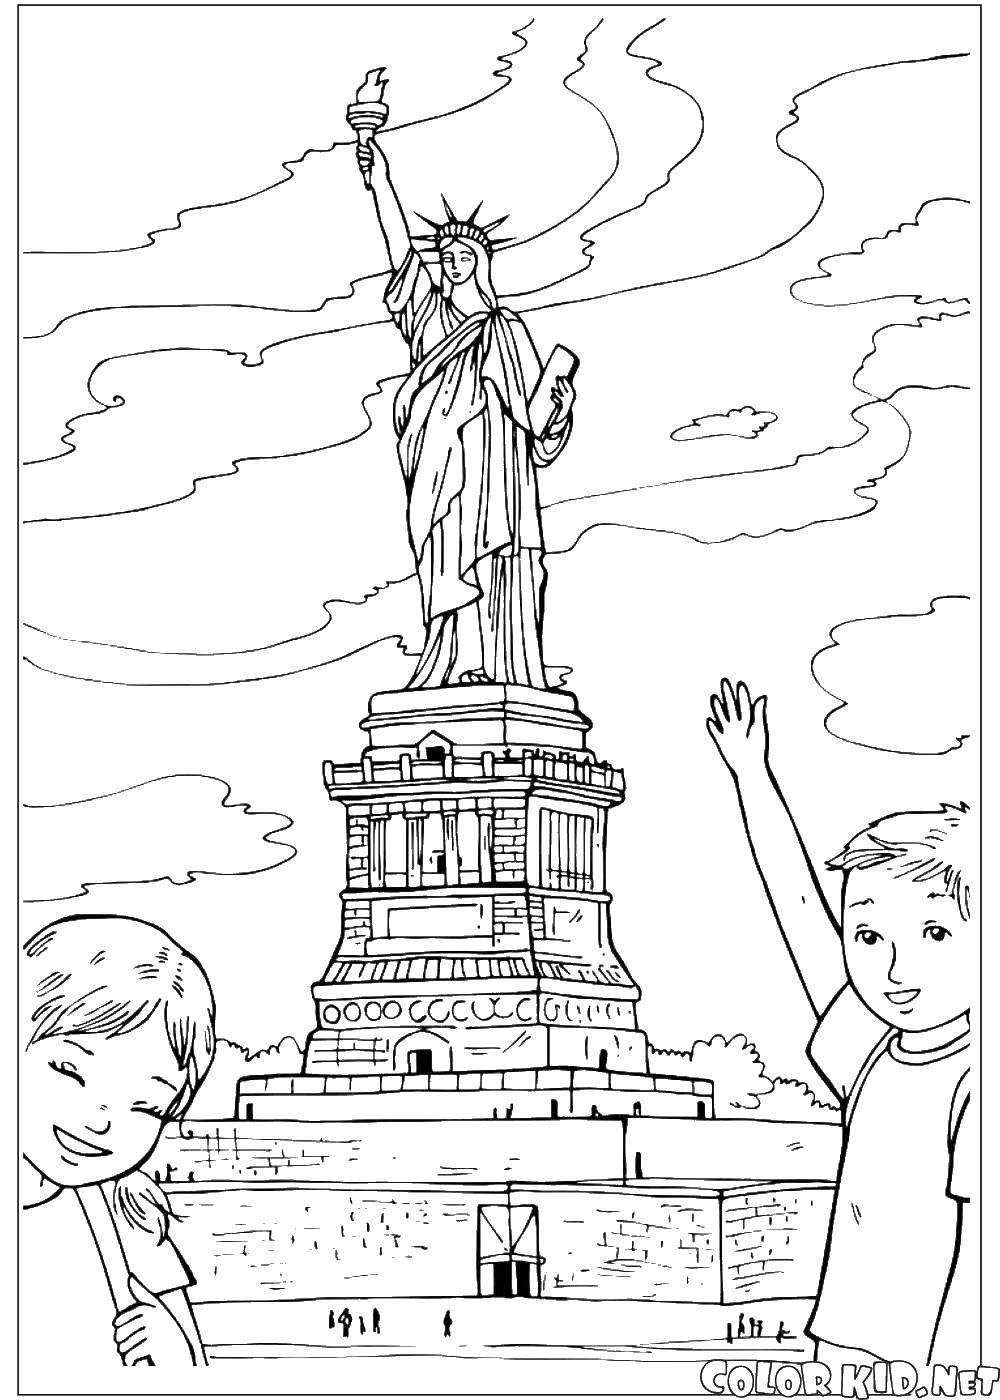 Coloring The statue of liberty in the United States. Category the statue of liberty . Tags:  America, USA, flag.